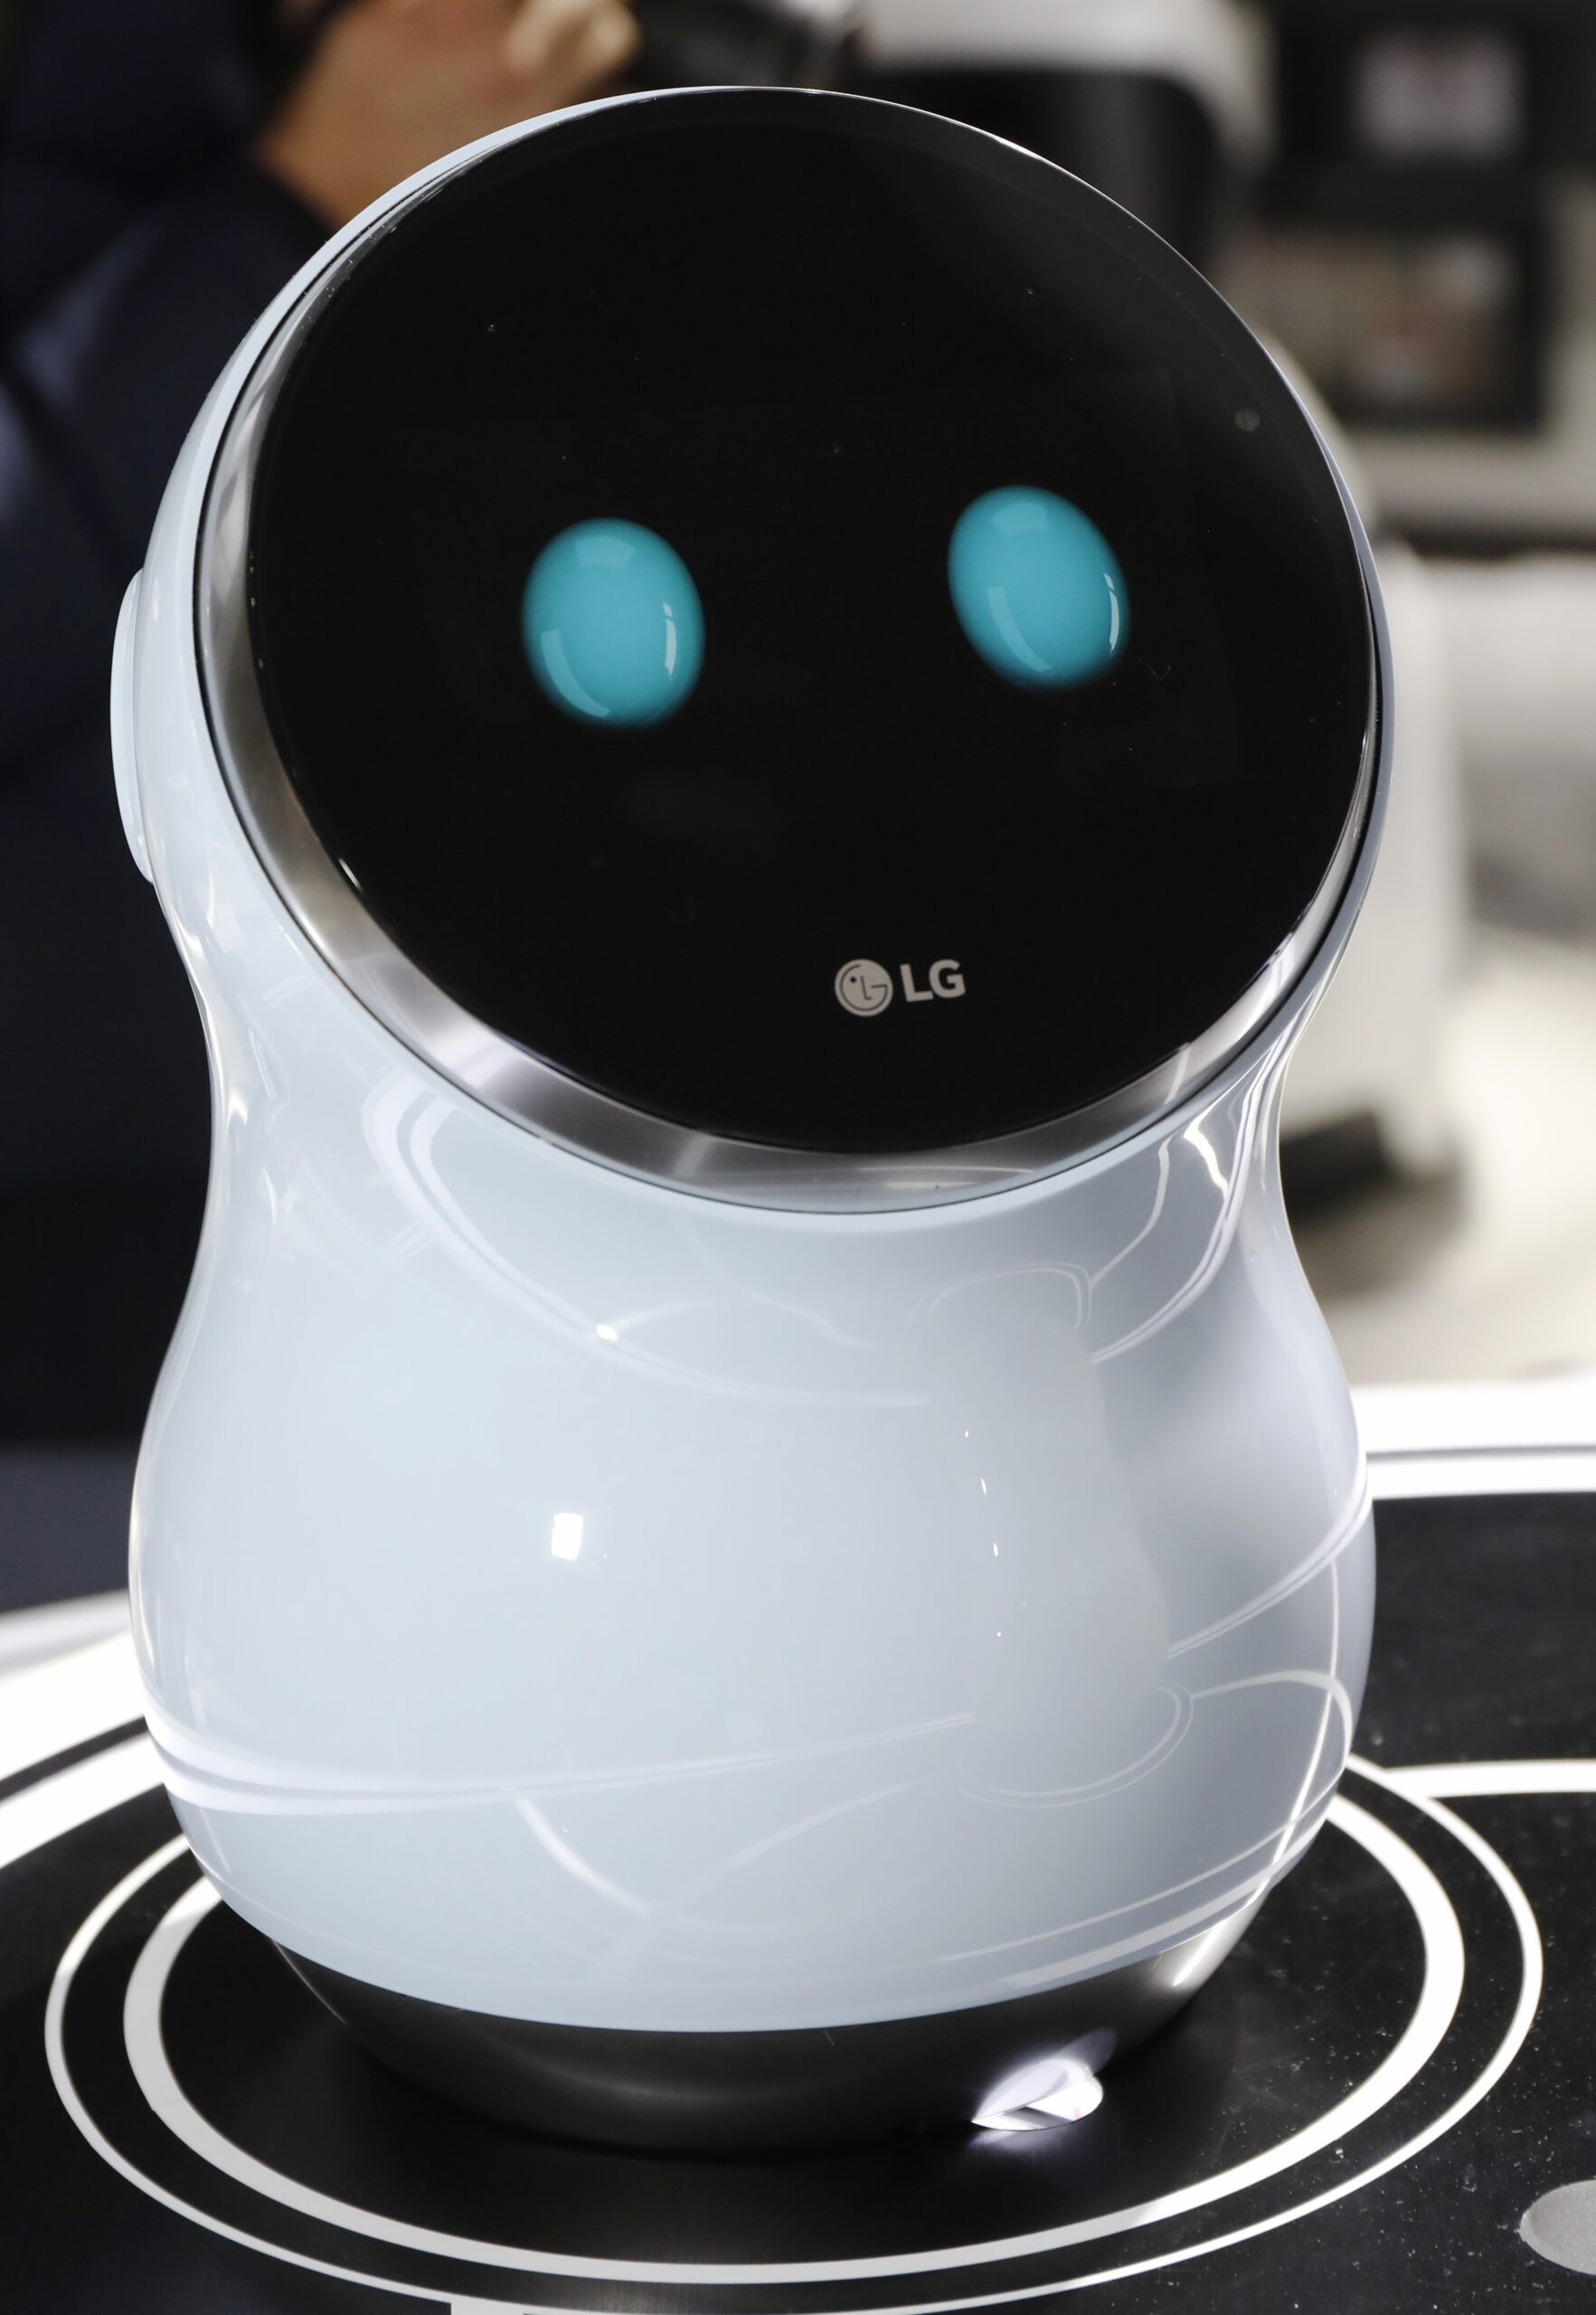 Close-up view of LG's CLOi Hub Robot on display at LG's CES 2017 booth